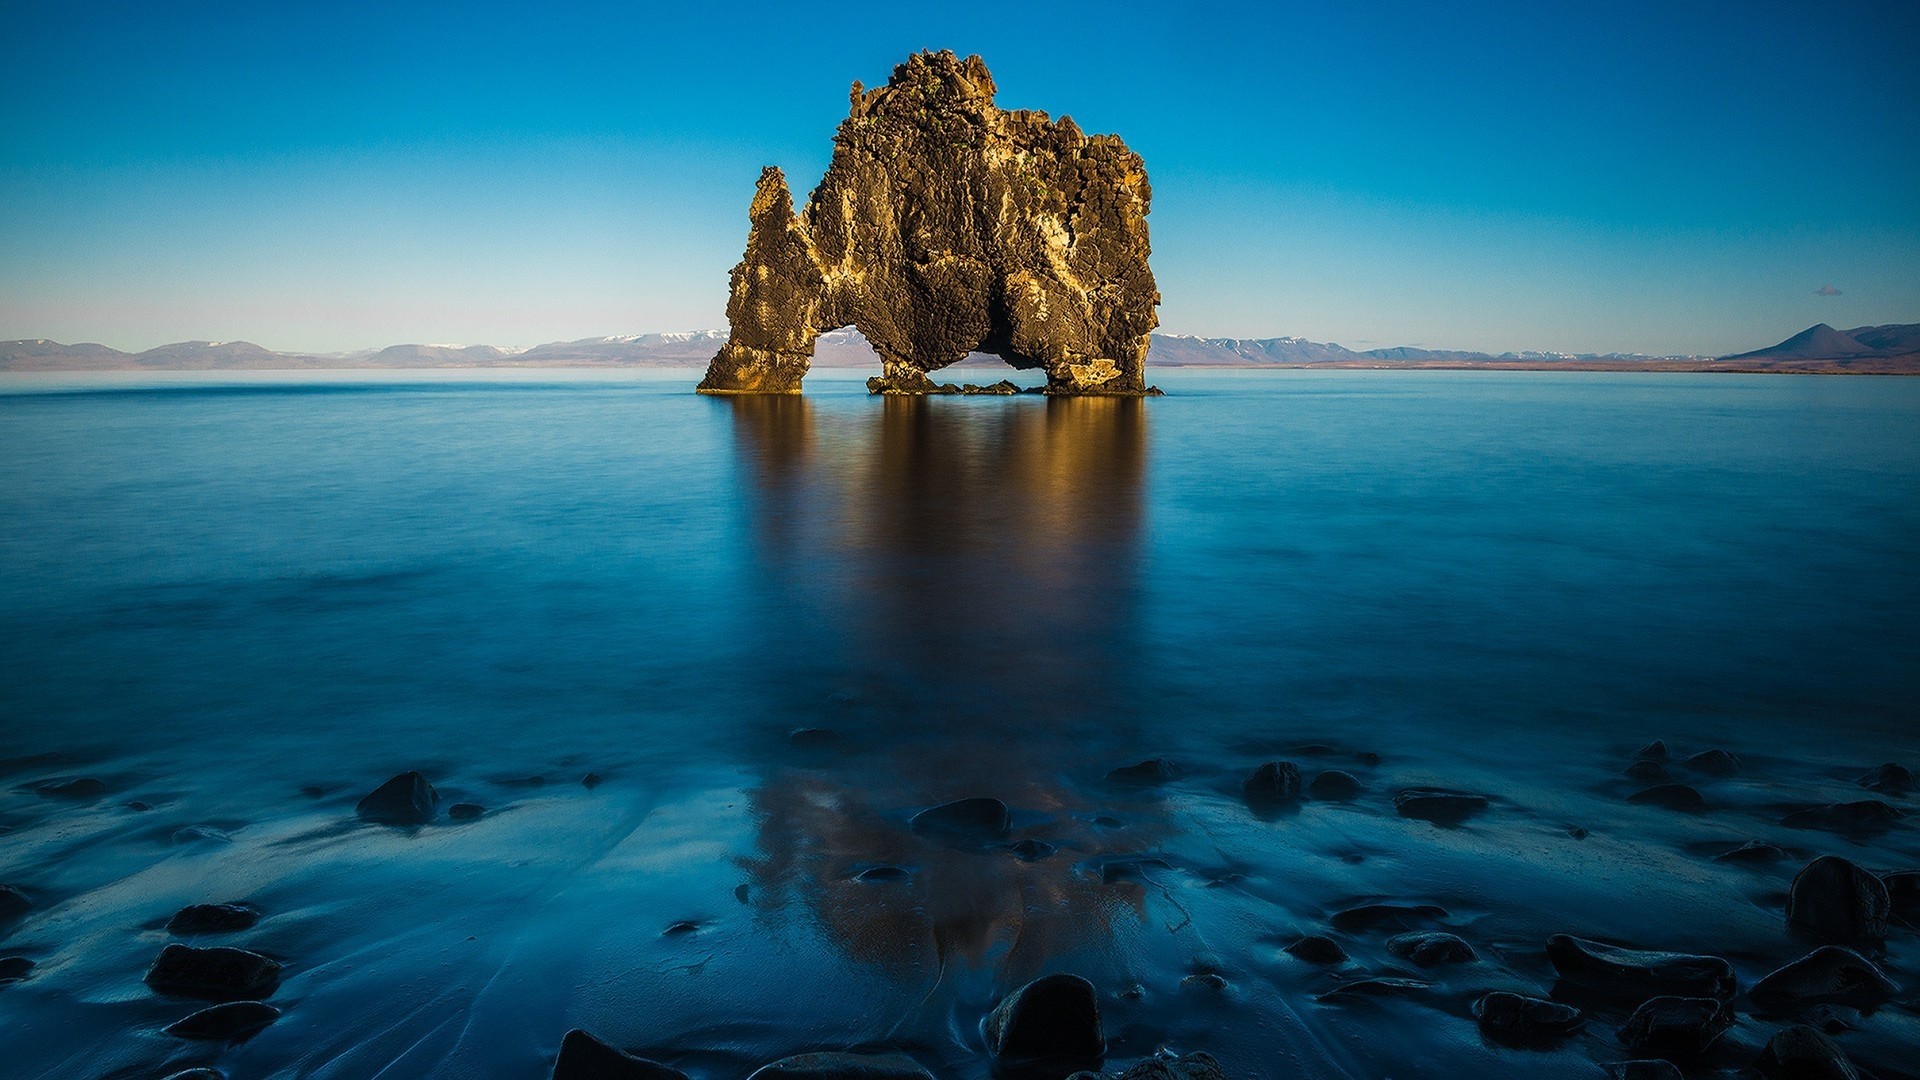 Hvitserkur North Iceland. How to set wallpaper on your desktop Click the download link from above and set the wallpaper on the desktop from your